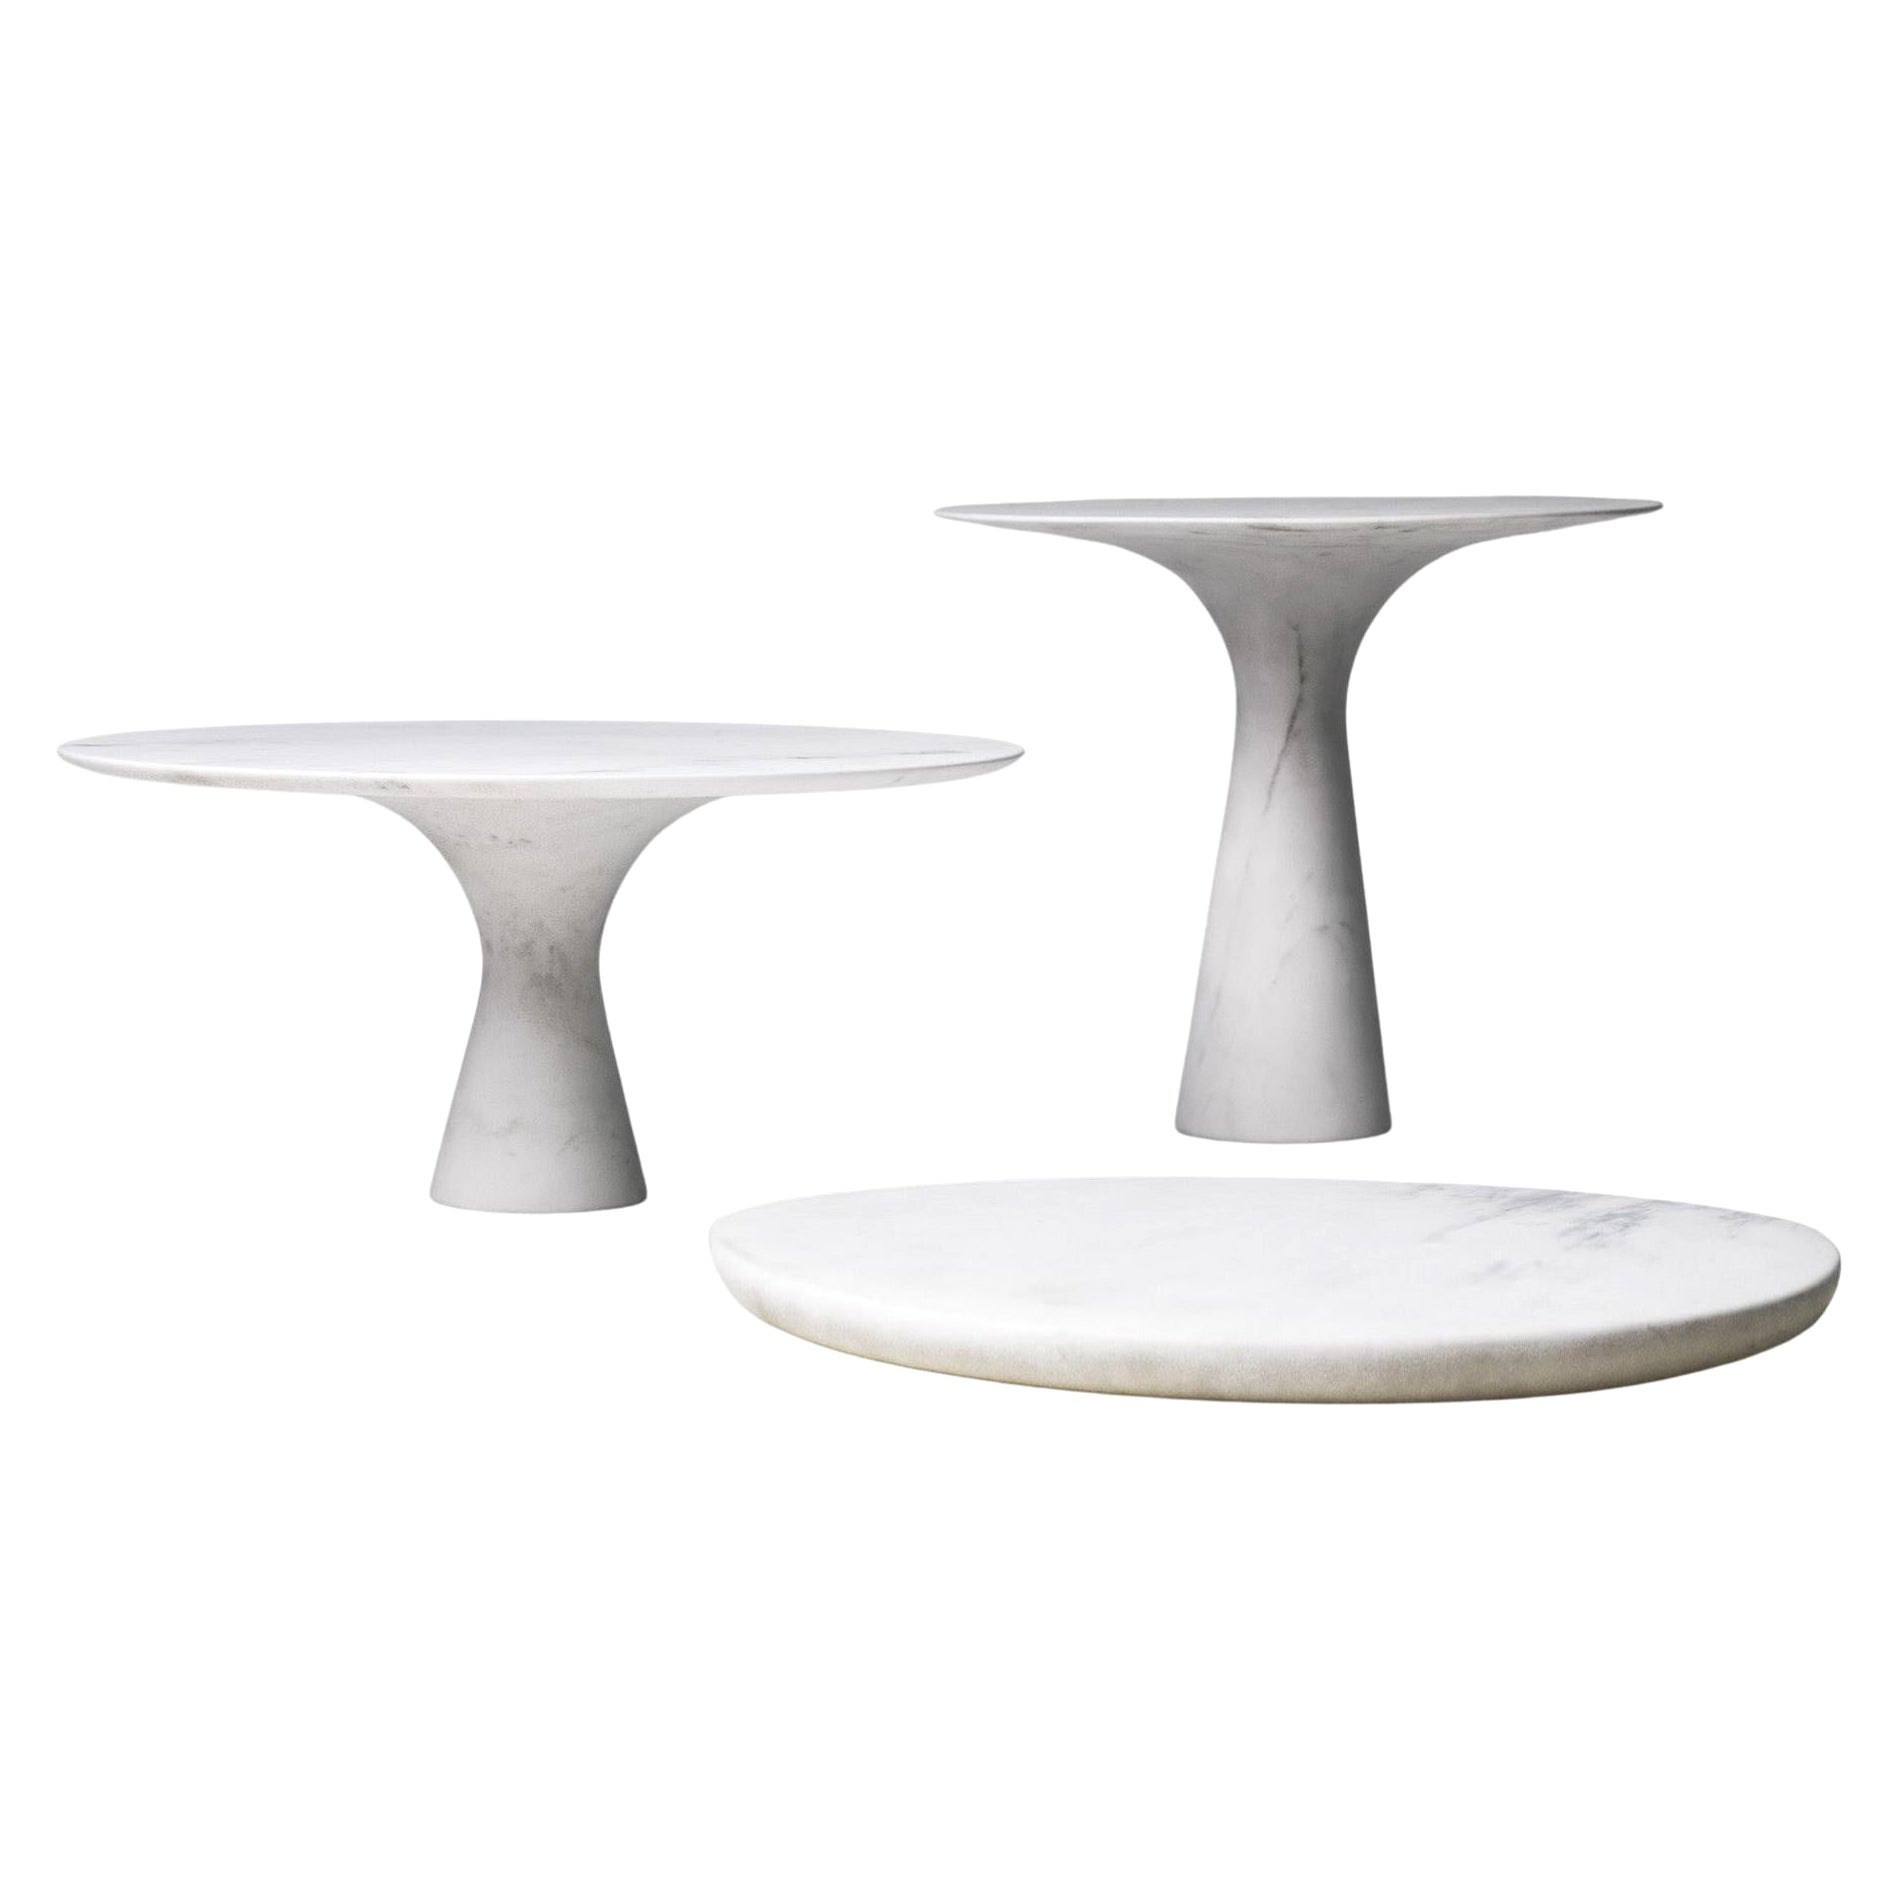 Set of 3 Refined Contemporary Marble Kynos Cake Stands and Plate For Sale